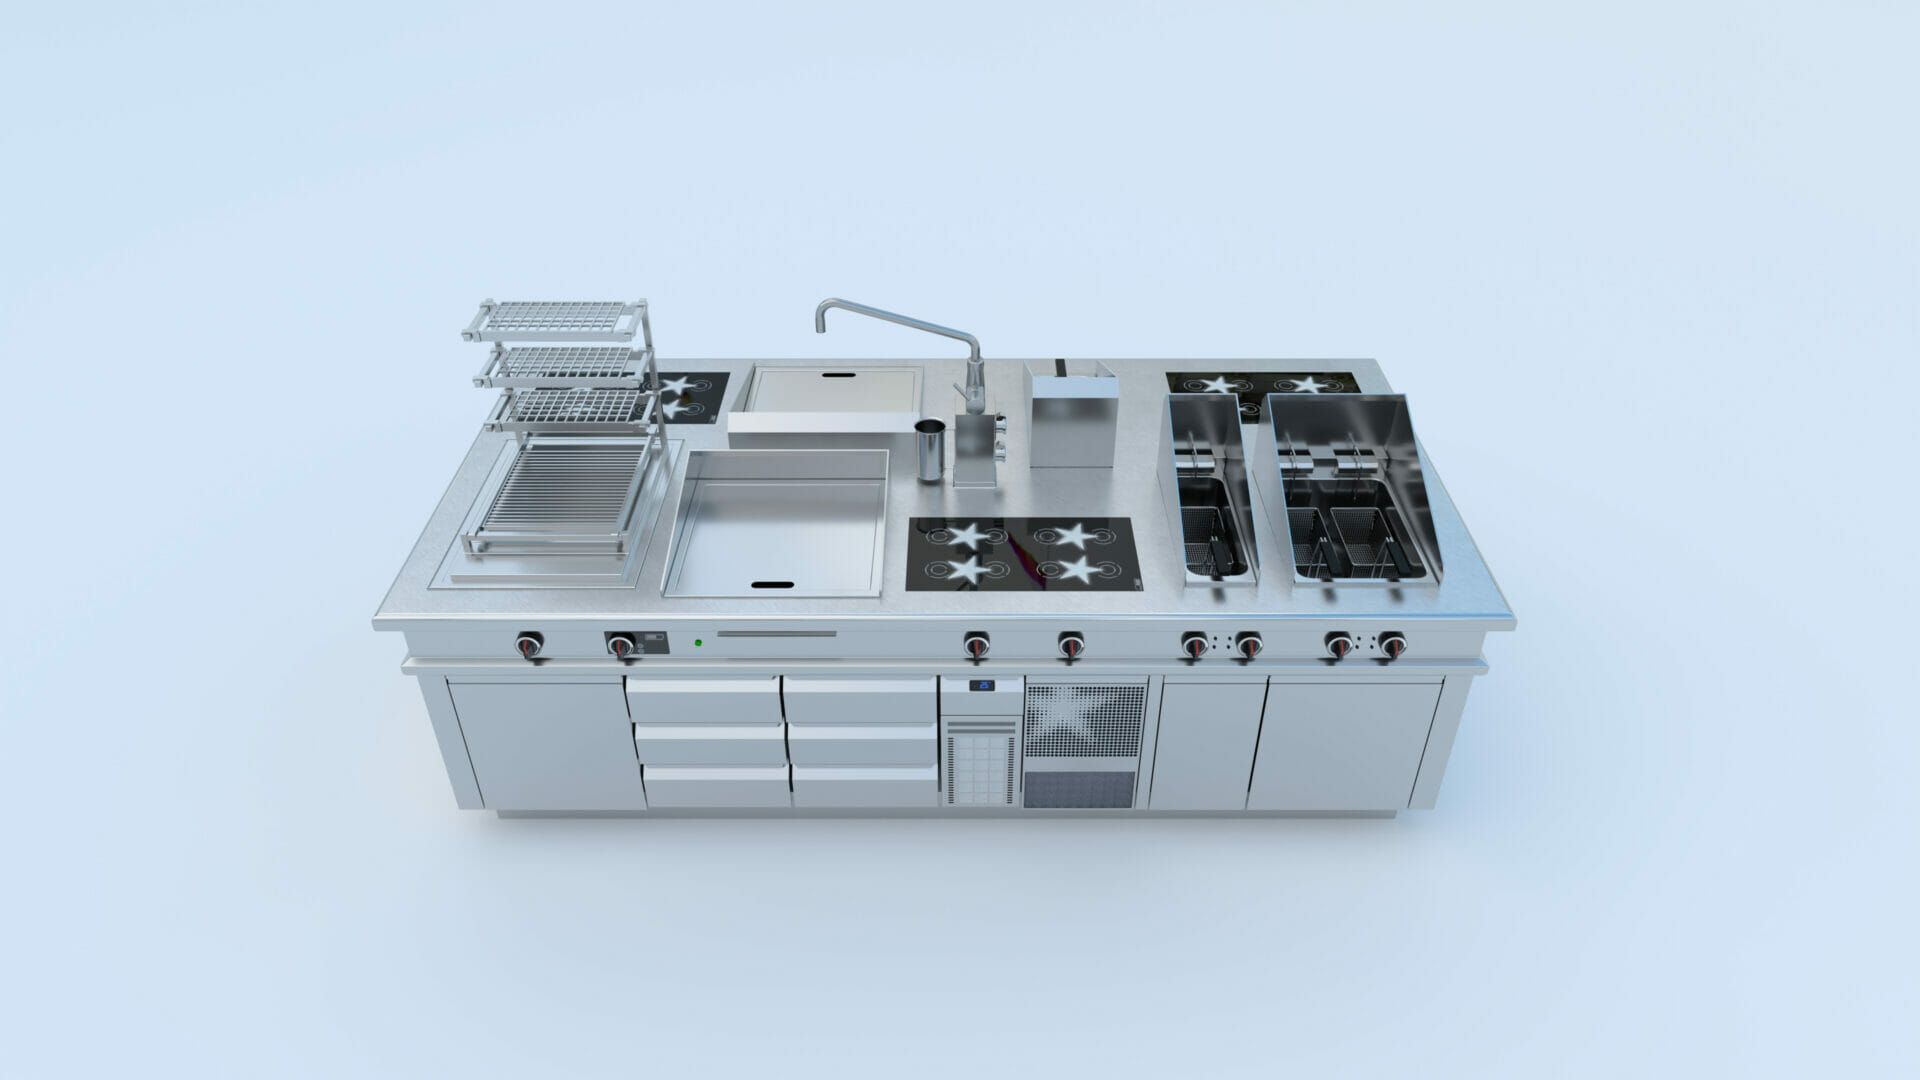 Exclusive Ranges installs first Menu System cooking range with full Data Lounge